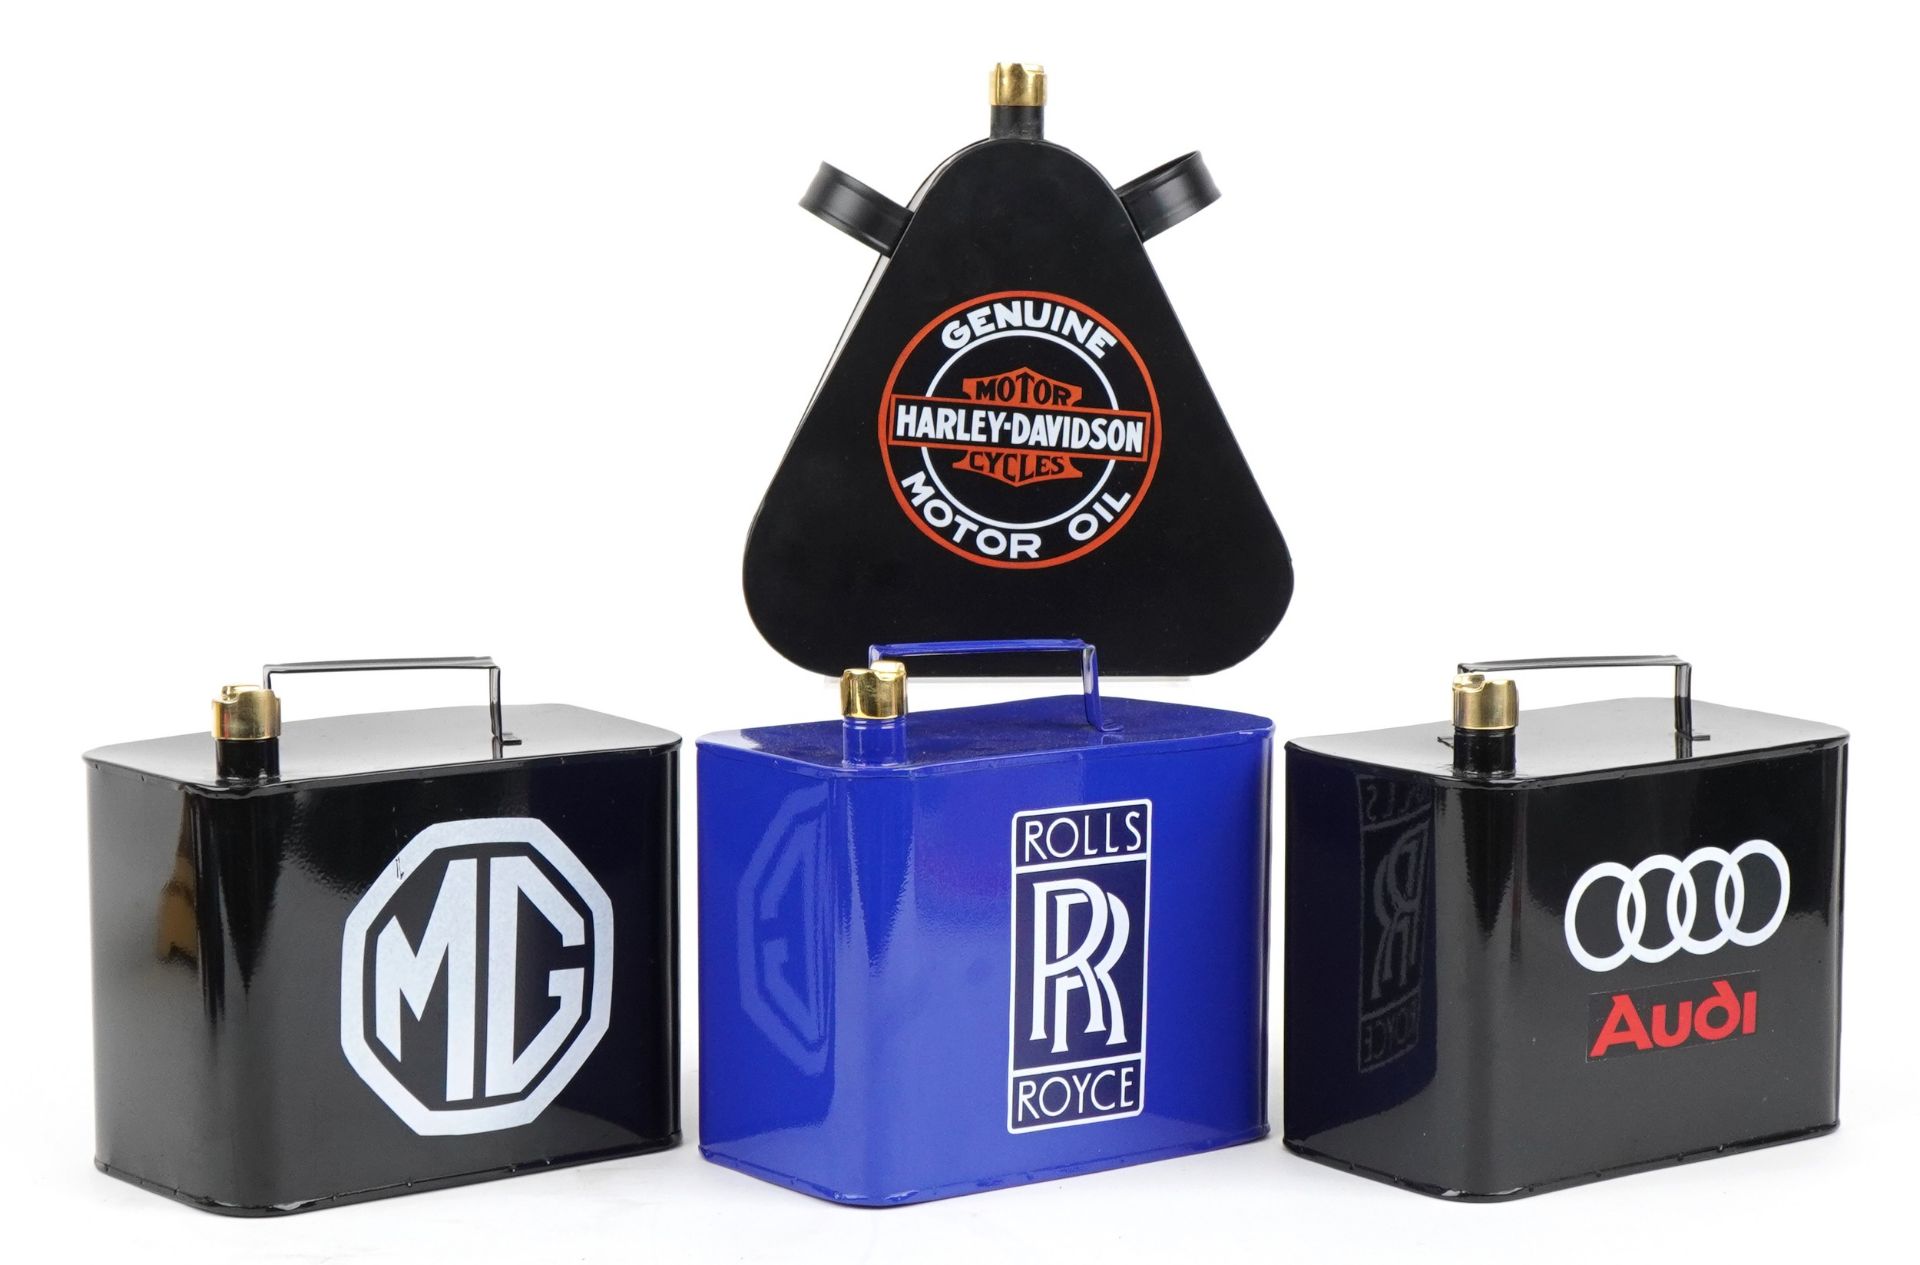 Four advertising decorative oil cans comprising Harley Davidson Motorcycles, MG, Rolls Royce and